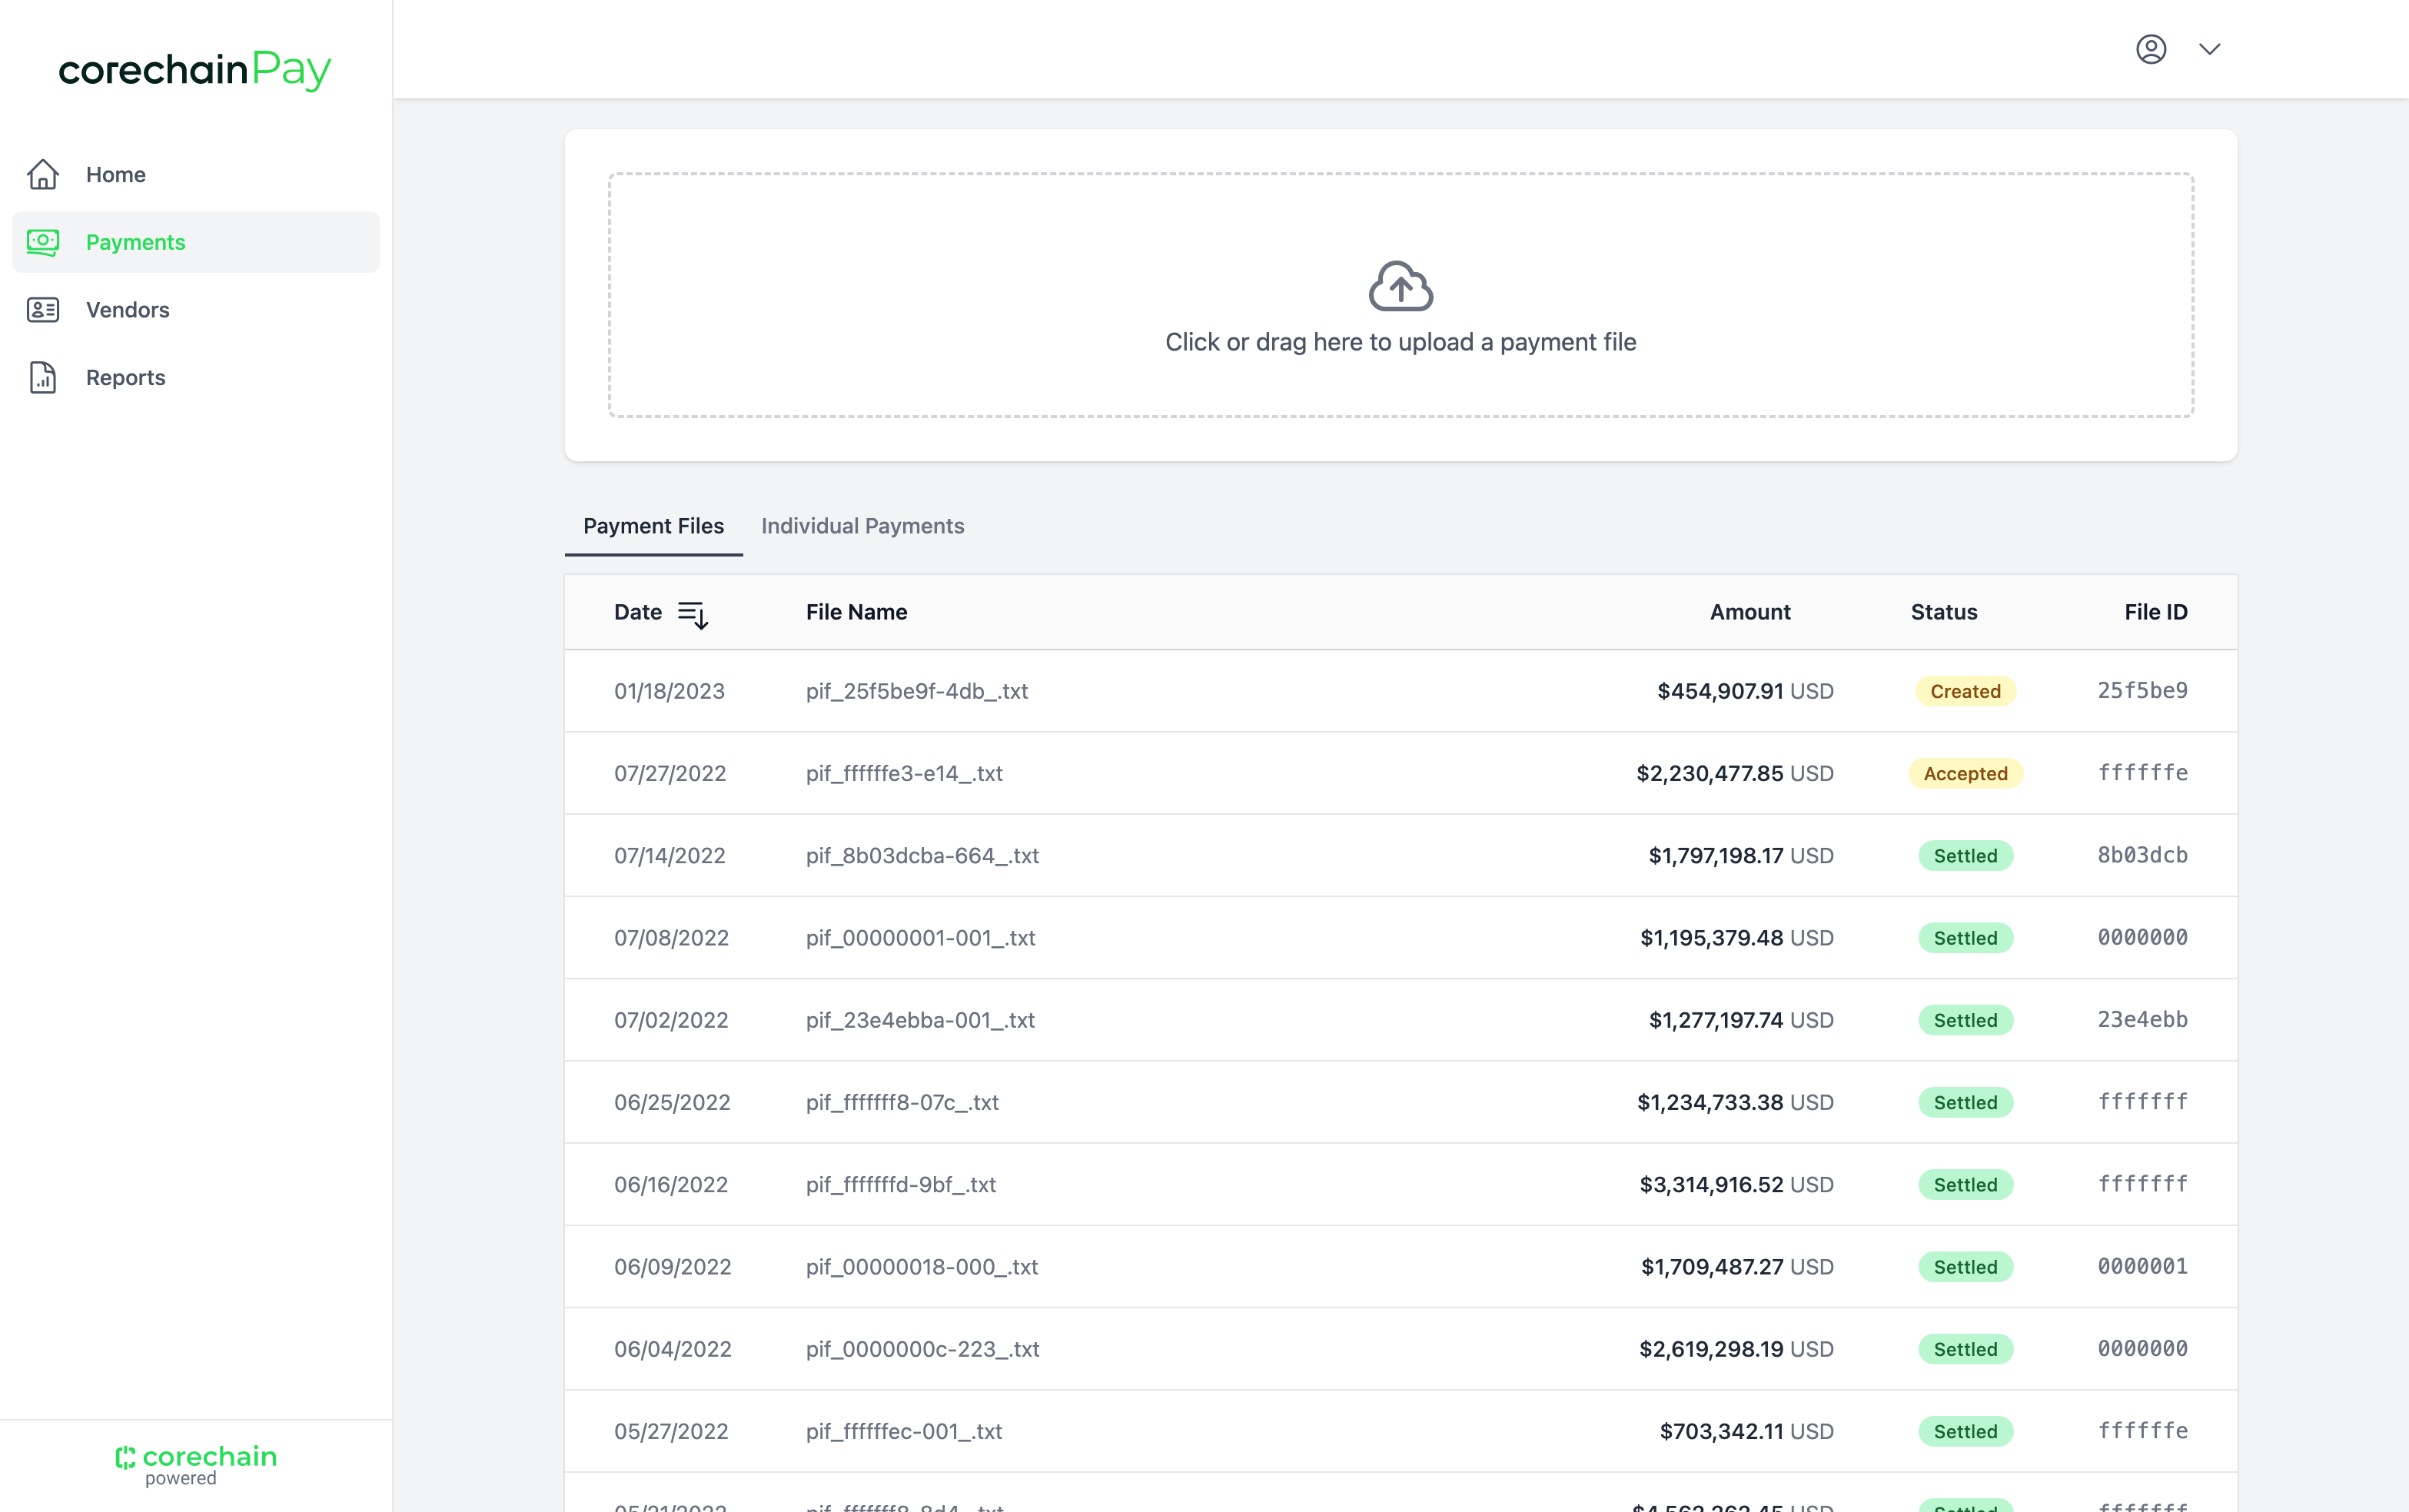 CoreChain Pay Payments Viewer